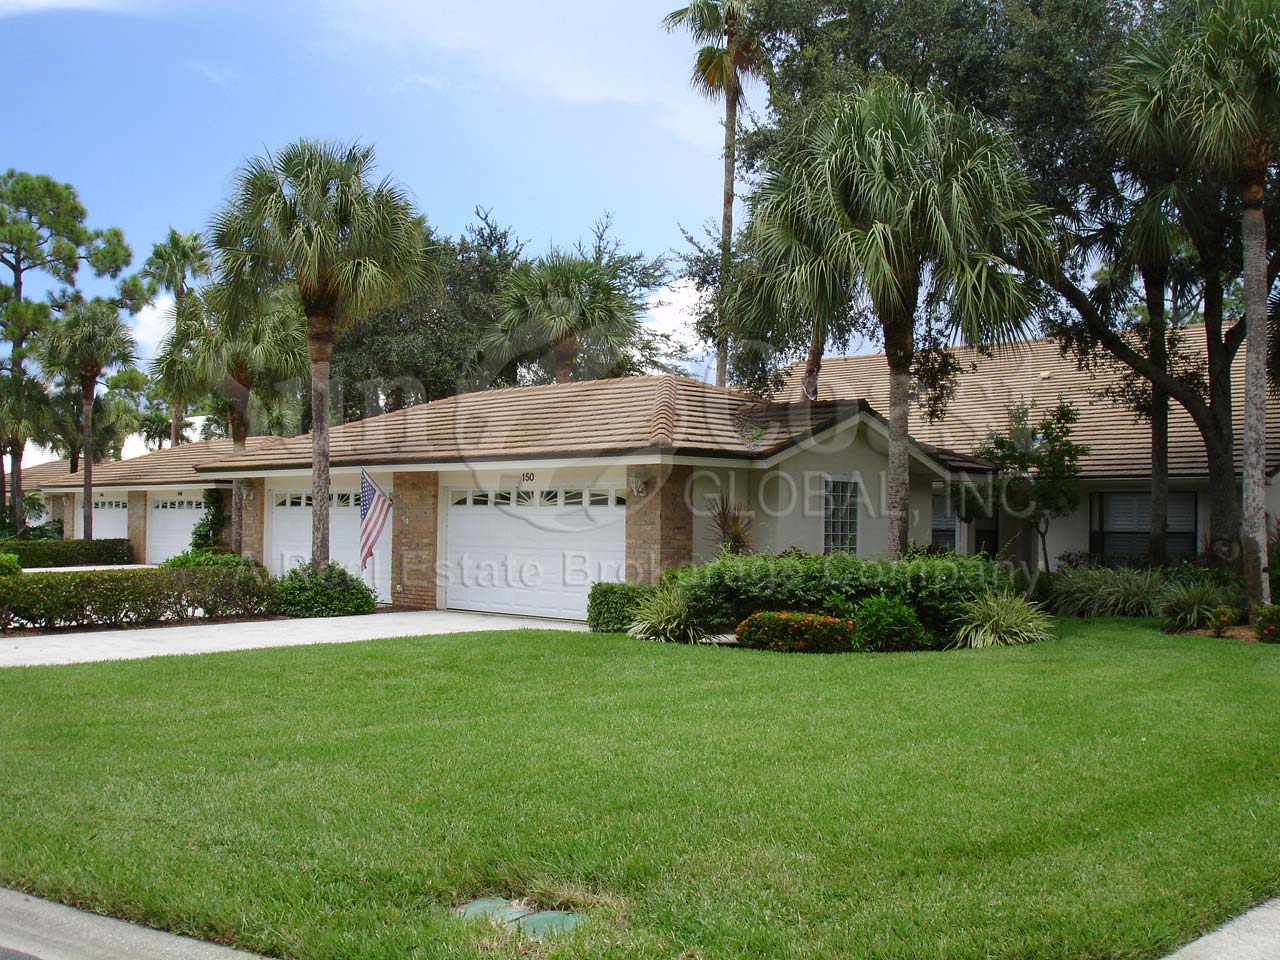 Cypress View Village neighborhood consists of 2 family attached villas with 2 car garages